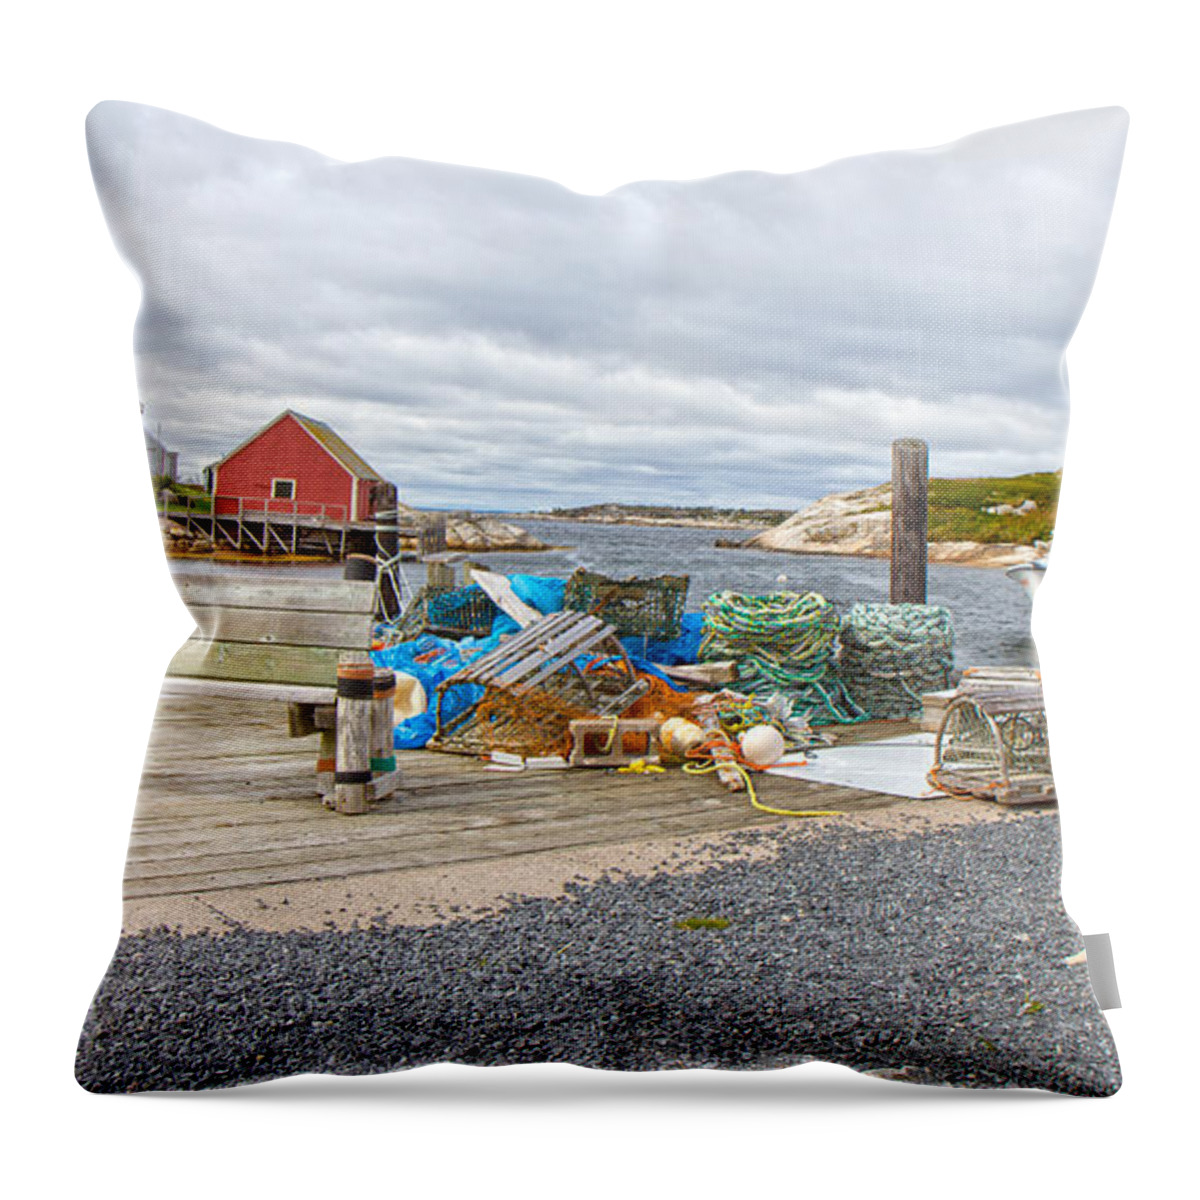 Peggy's Throw Pillow featuring the photograph Peggy's Cove 2 by Betsy Knapp